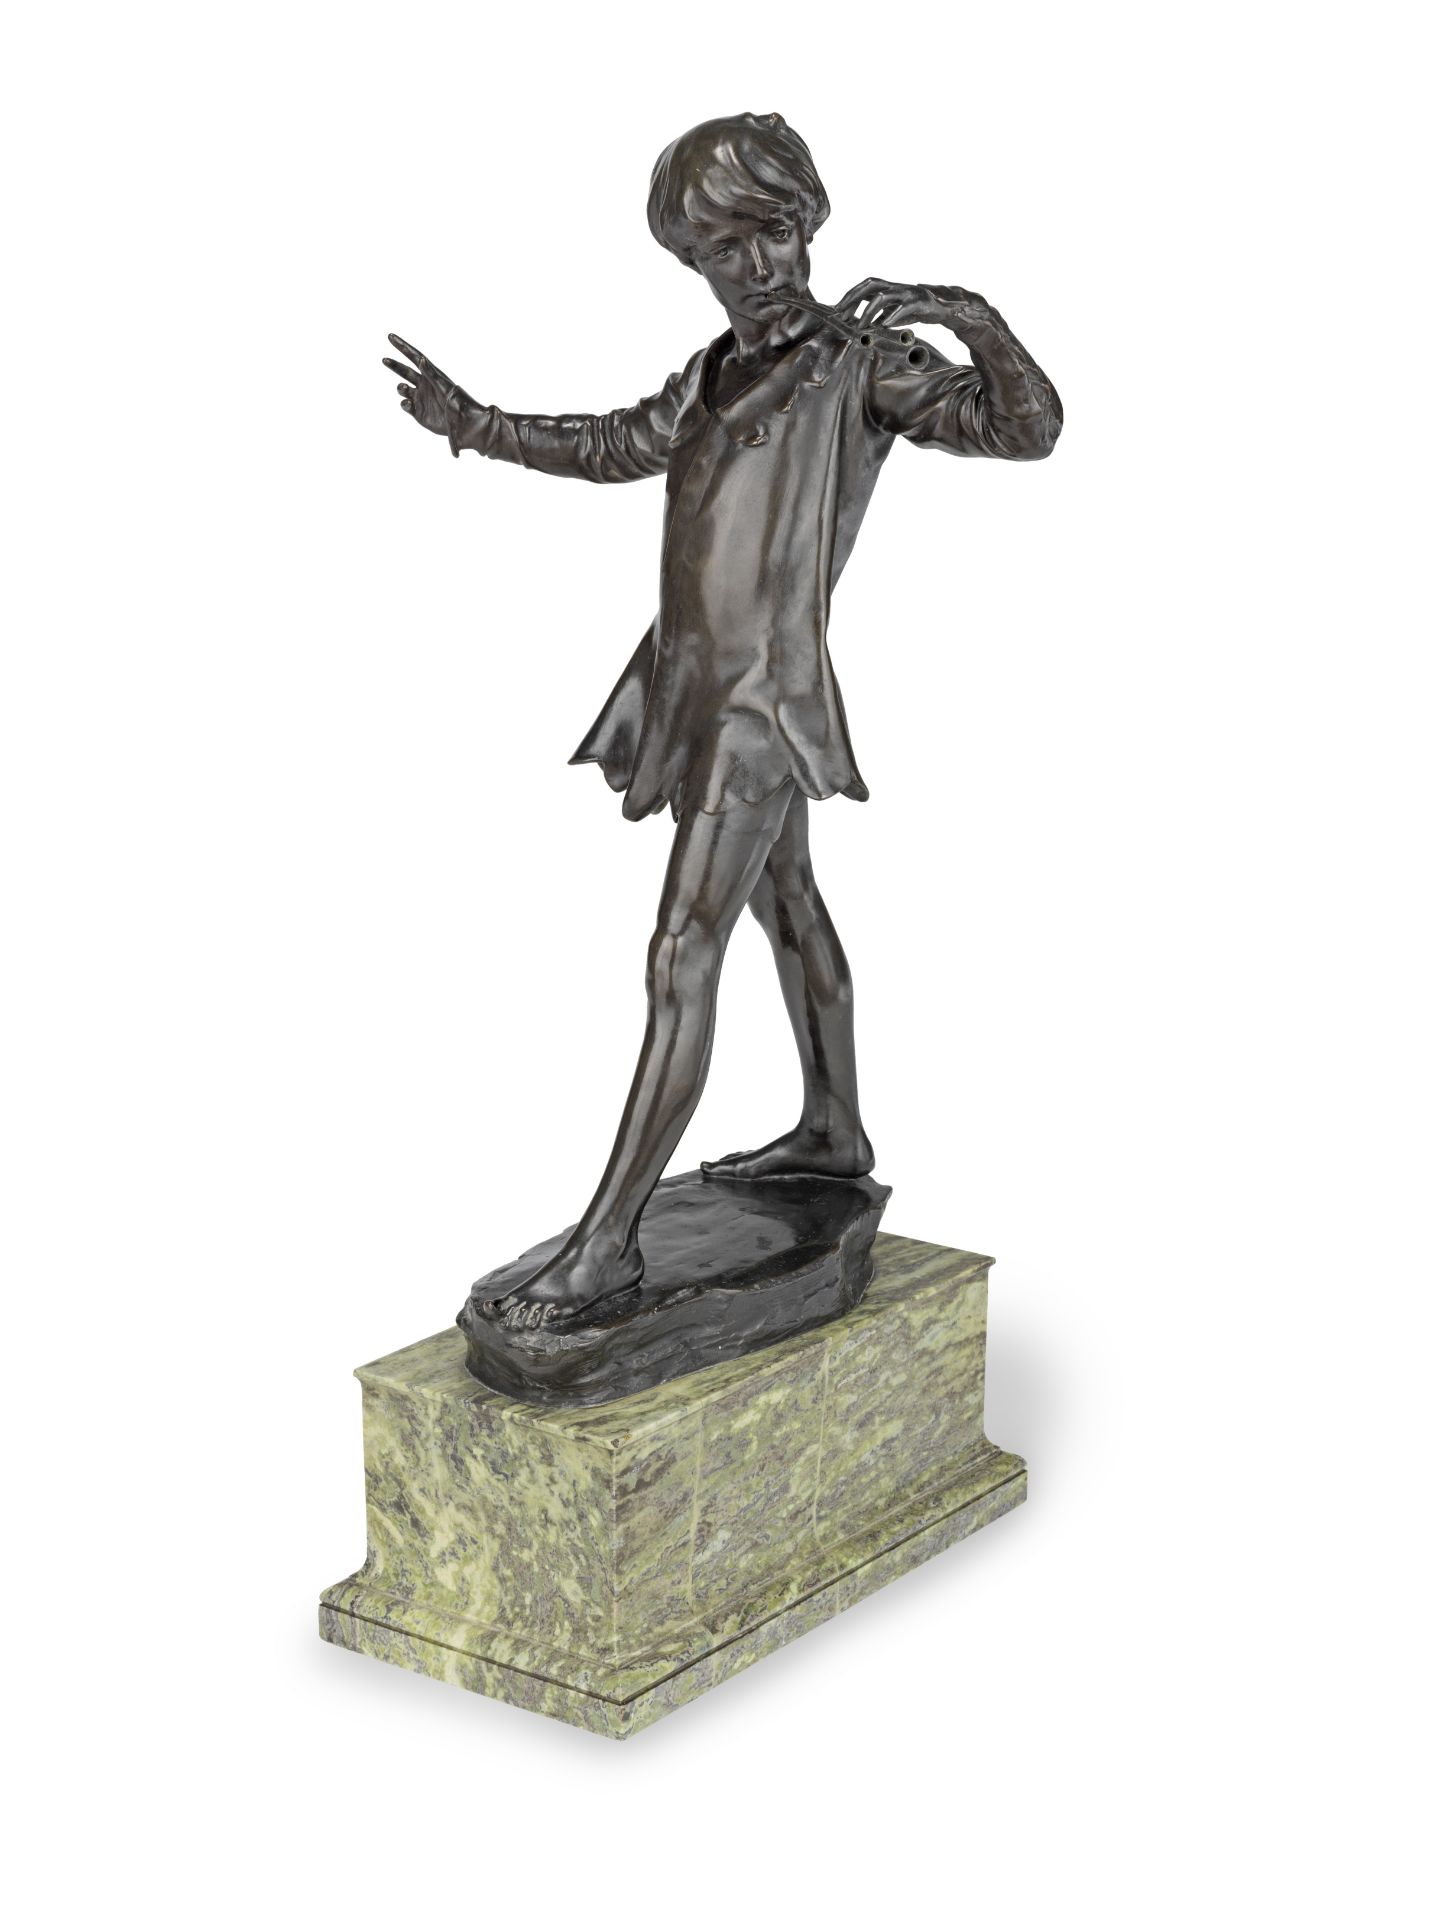 Sir George James Frampton (British, 1860-1928): A patinated bronze figure of 'Peter Pan' the fig...